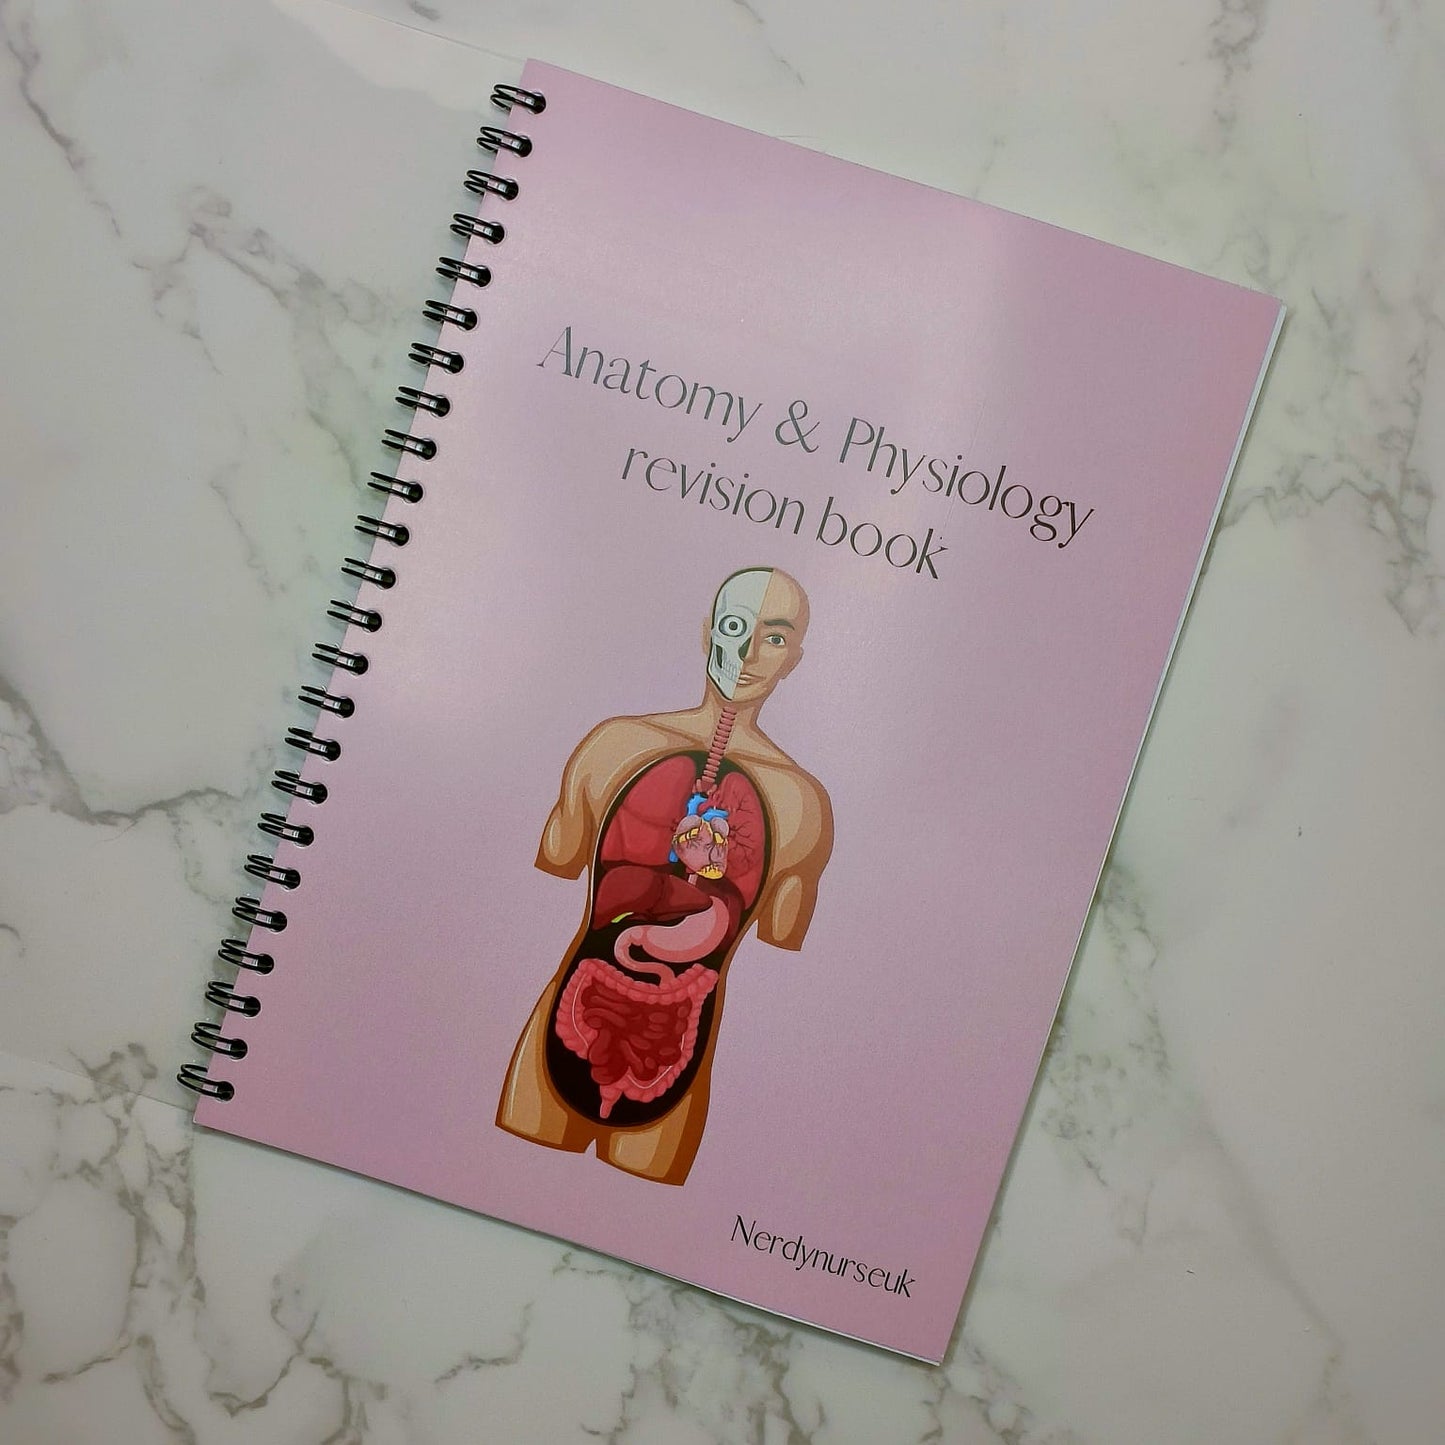 Anatomy and physiology revision book